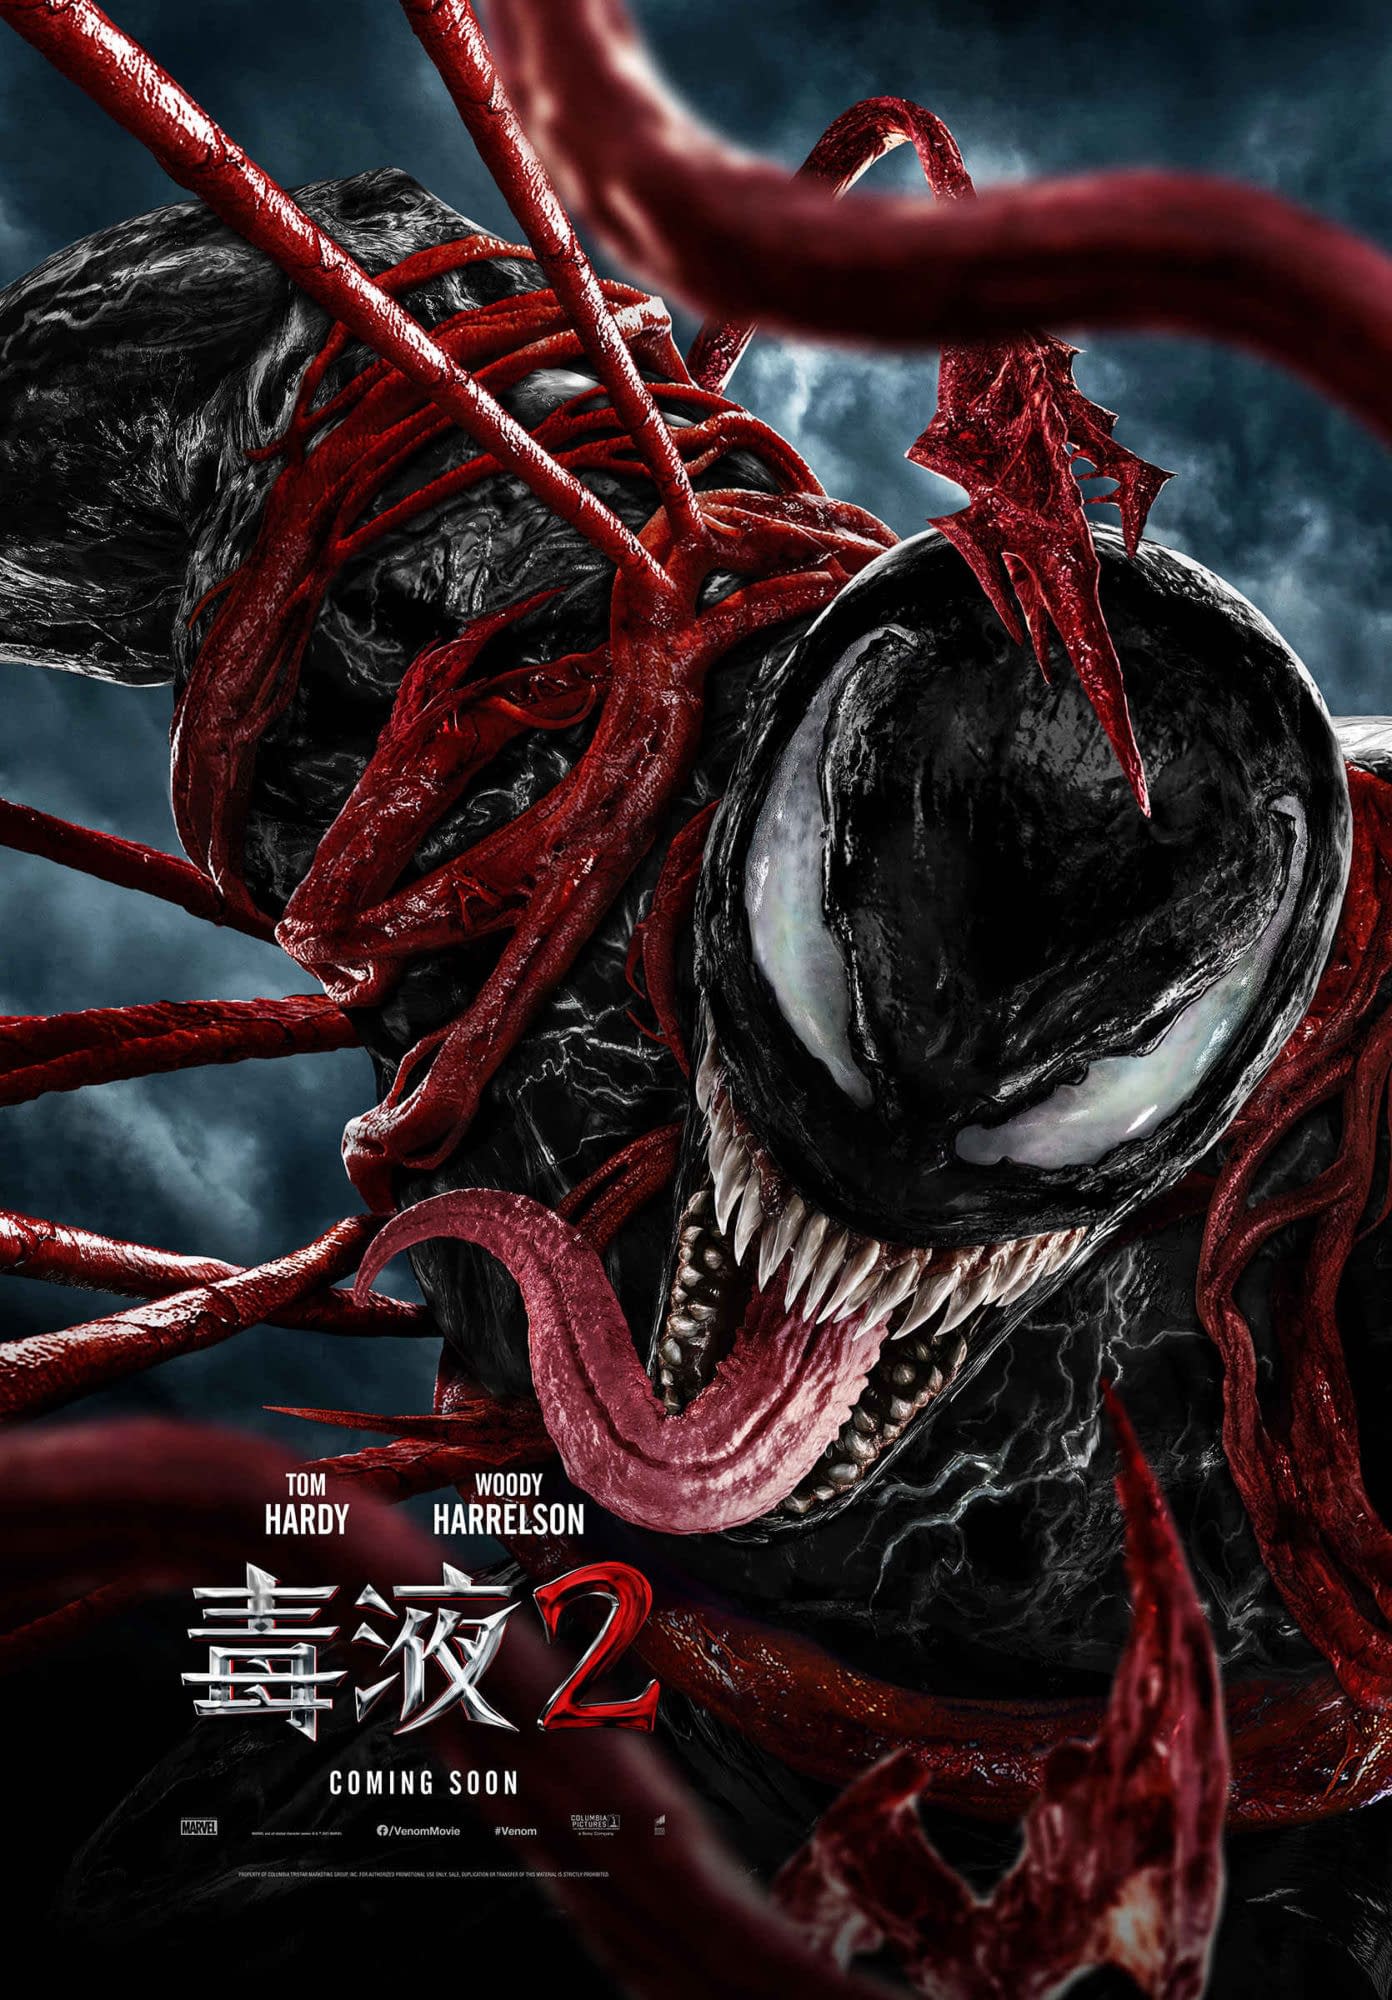 Venom: Let There Be Carnage Image and a New International Poster